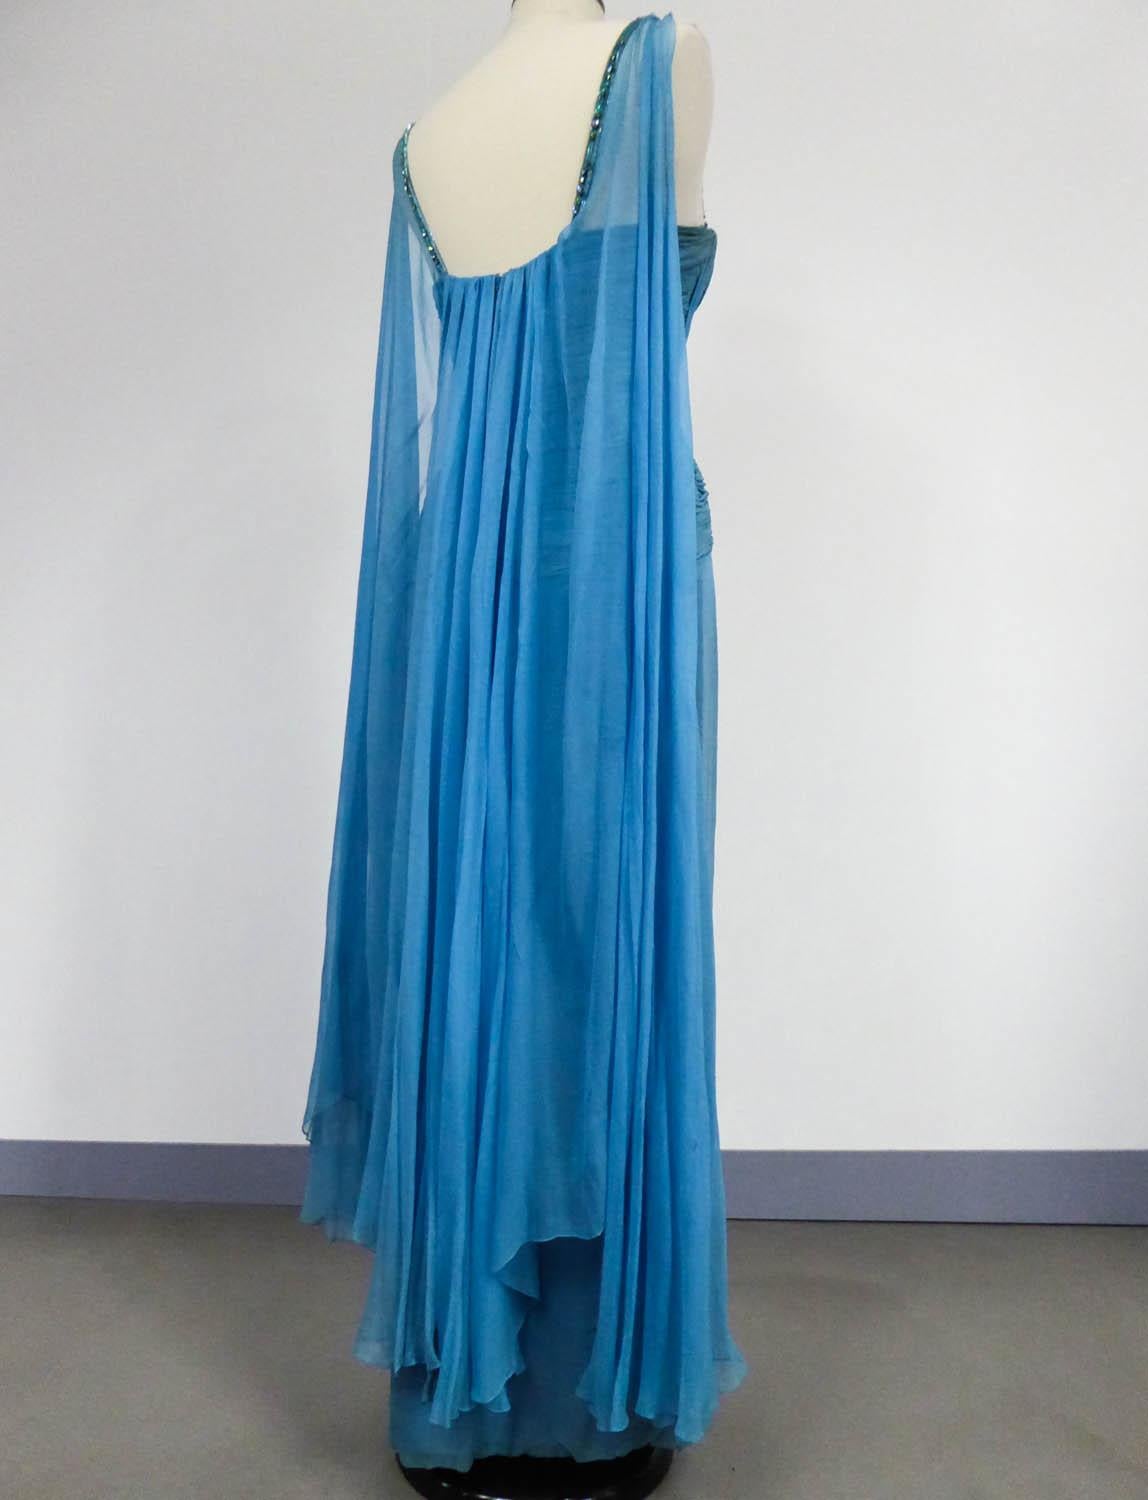 A French Carven Couture Chiffon Evening Dress numbered 11150 Circa 1960/1970 For Sale 6